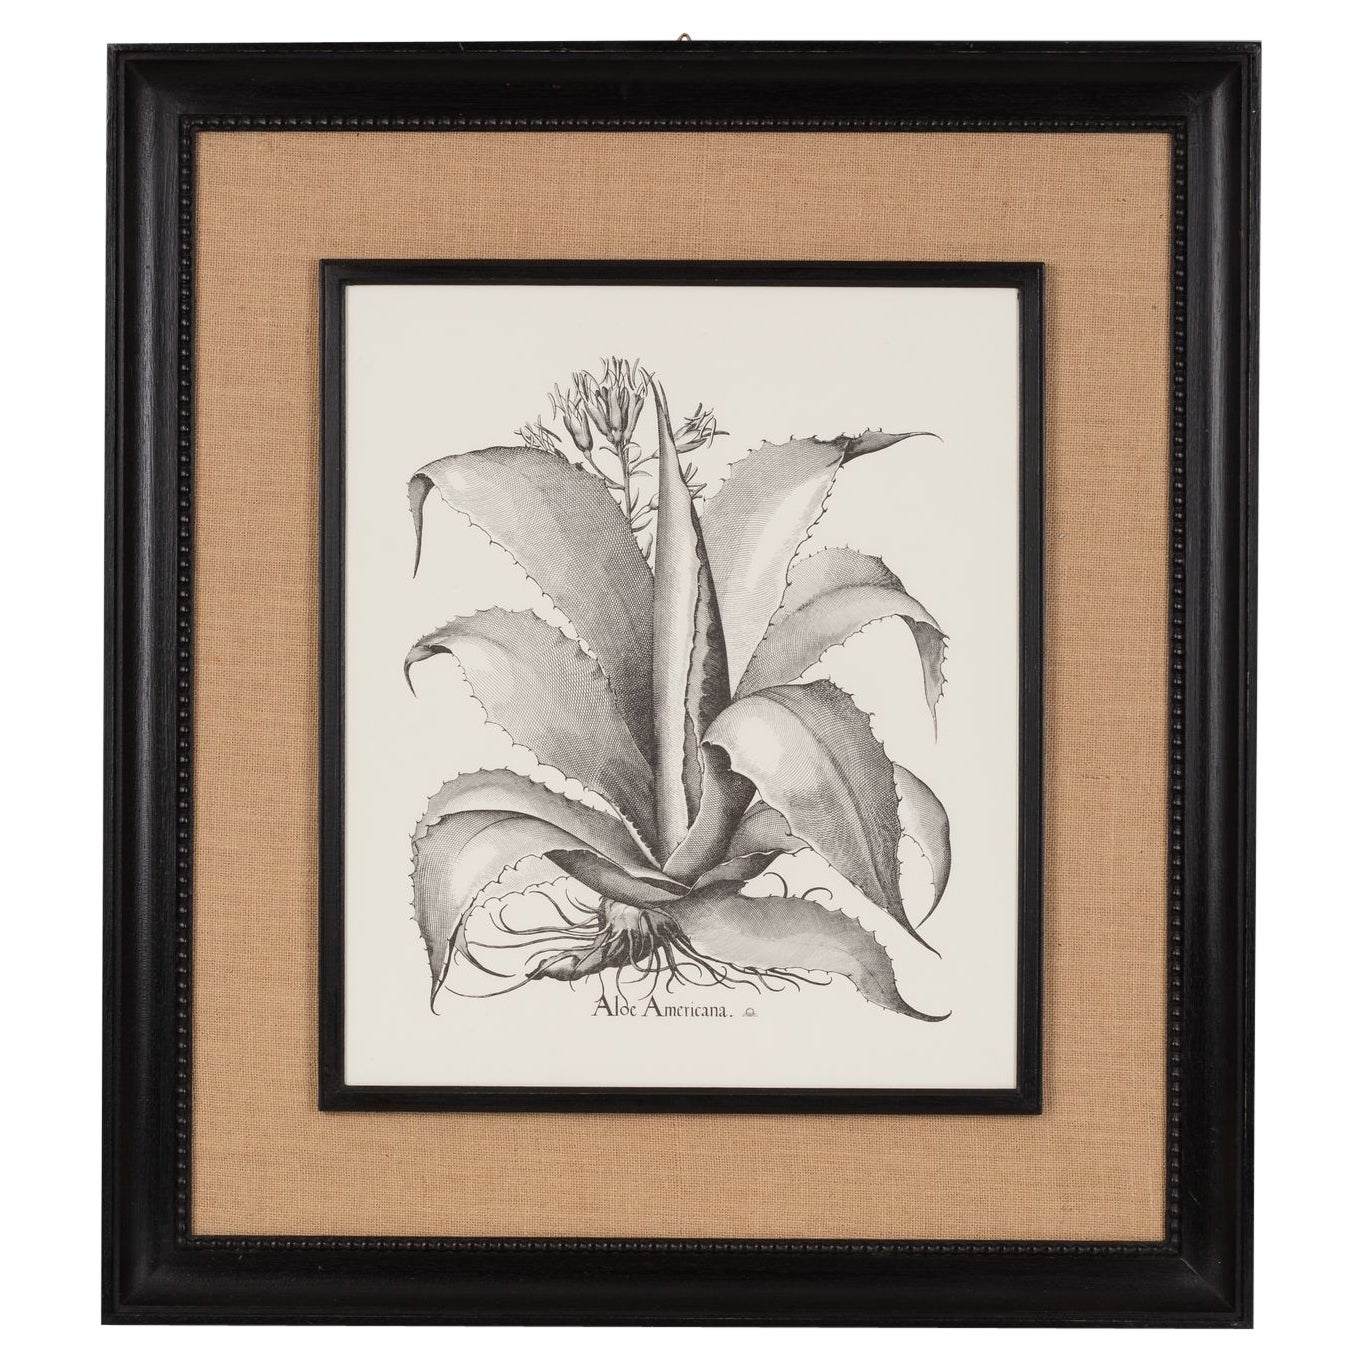 Italian Contemporary HandCrafted Print "Aloe America" Wood and Jute Frame 1 of 2 For Sale